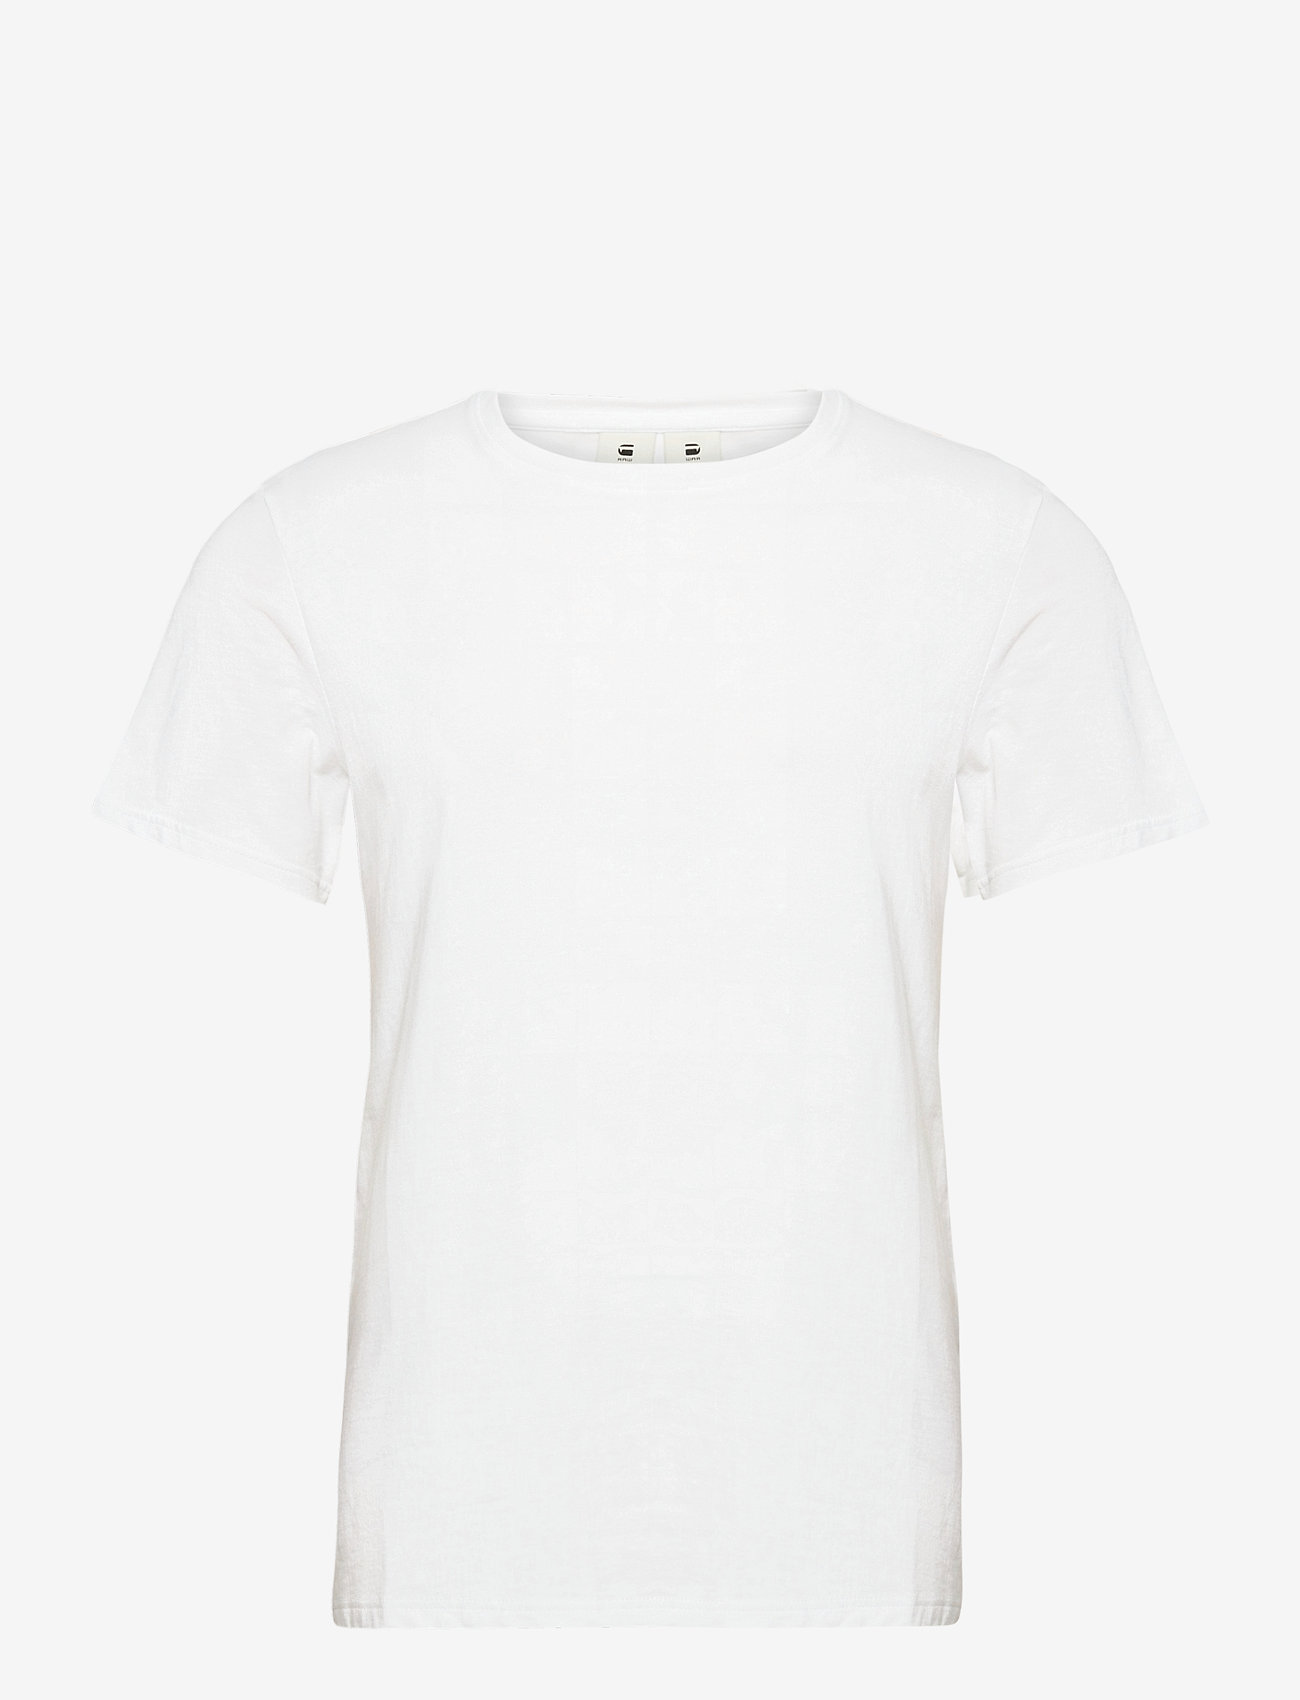 G-Star RAW - Base-s r t s\s - lowest prices - white - 0